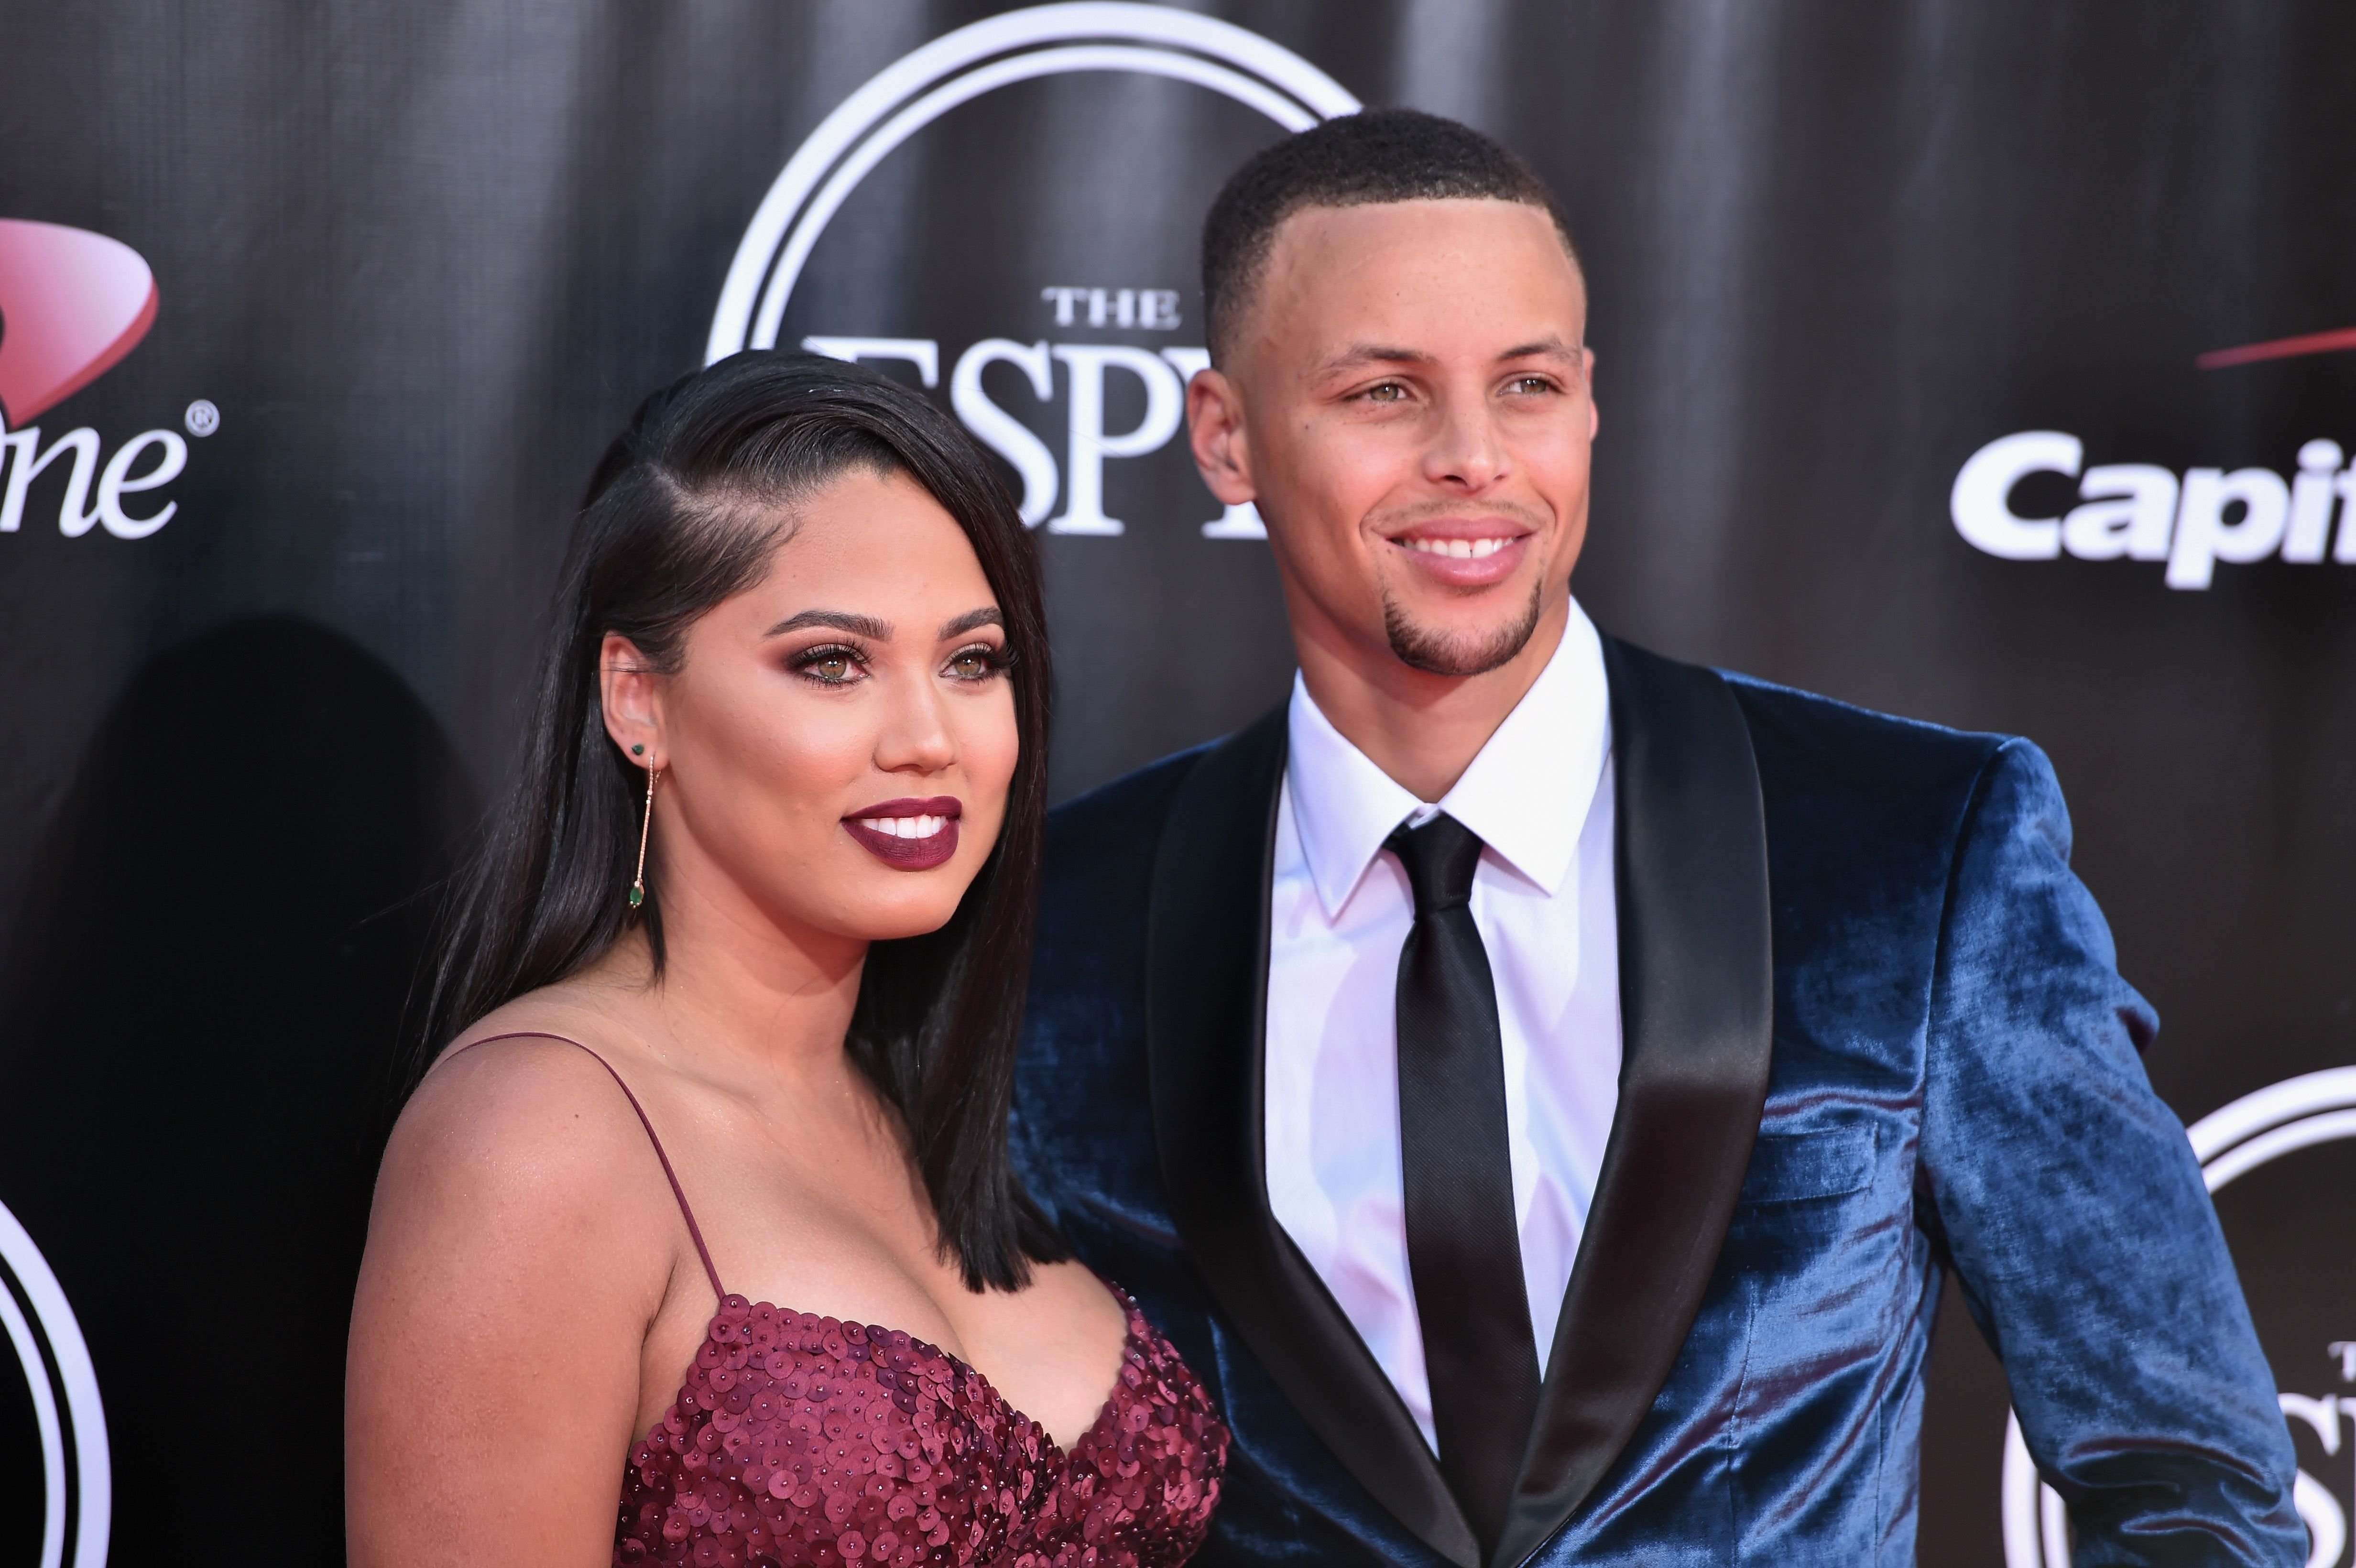 Stephen Curry and Ayesha Curry at the 2016 ESPYS at Microsoft Theater on July 13, 2016 | Photo: Getty Images